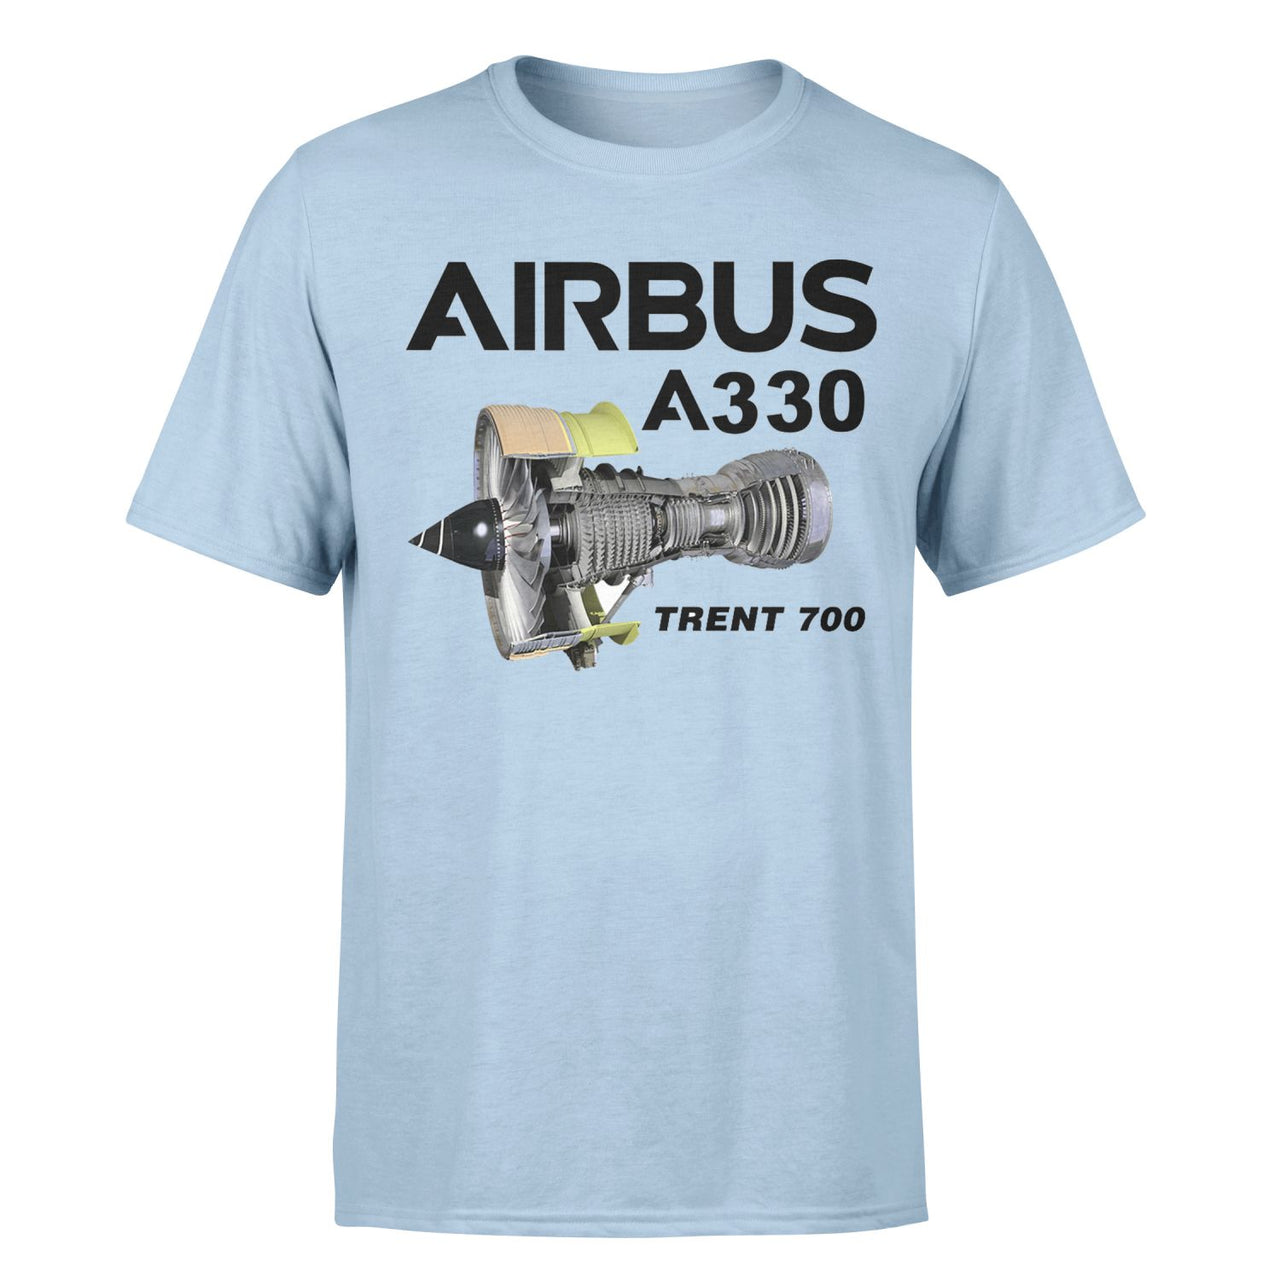 Airbus A330 & Trent 700 Engine Designed T-Shirts